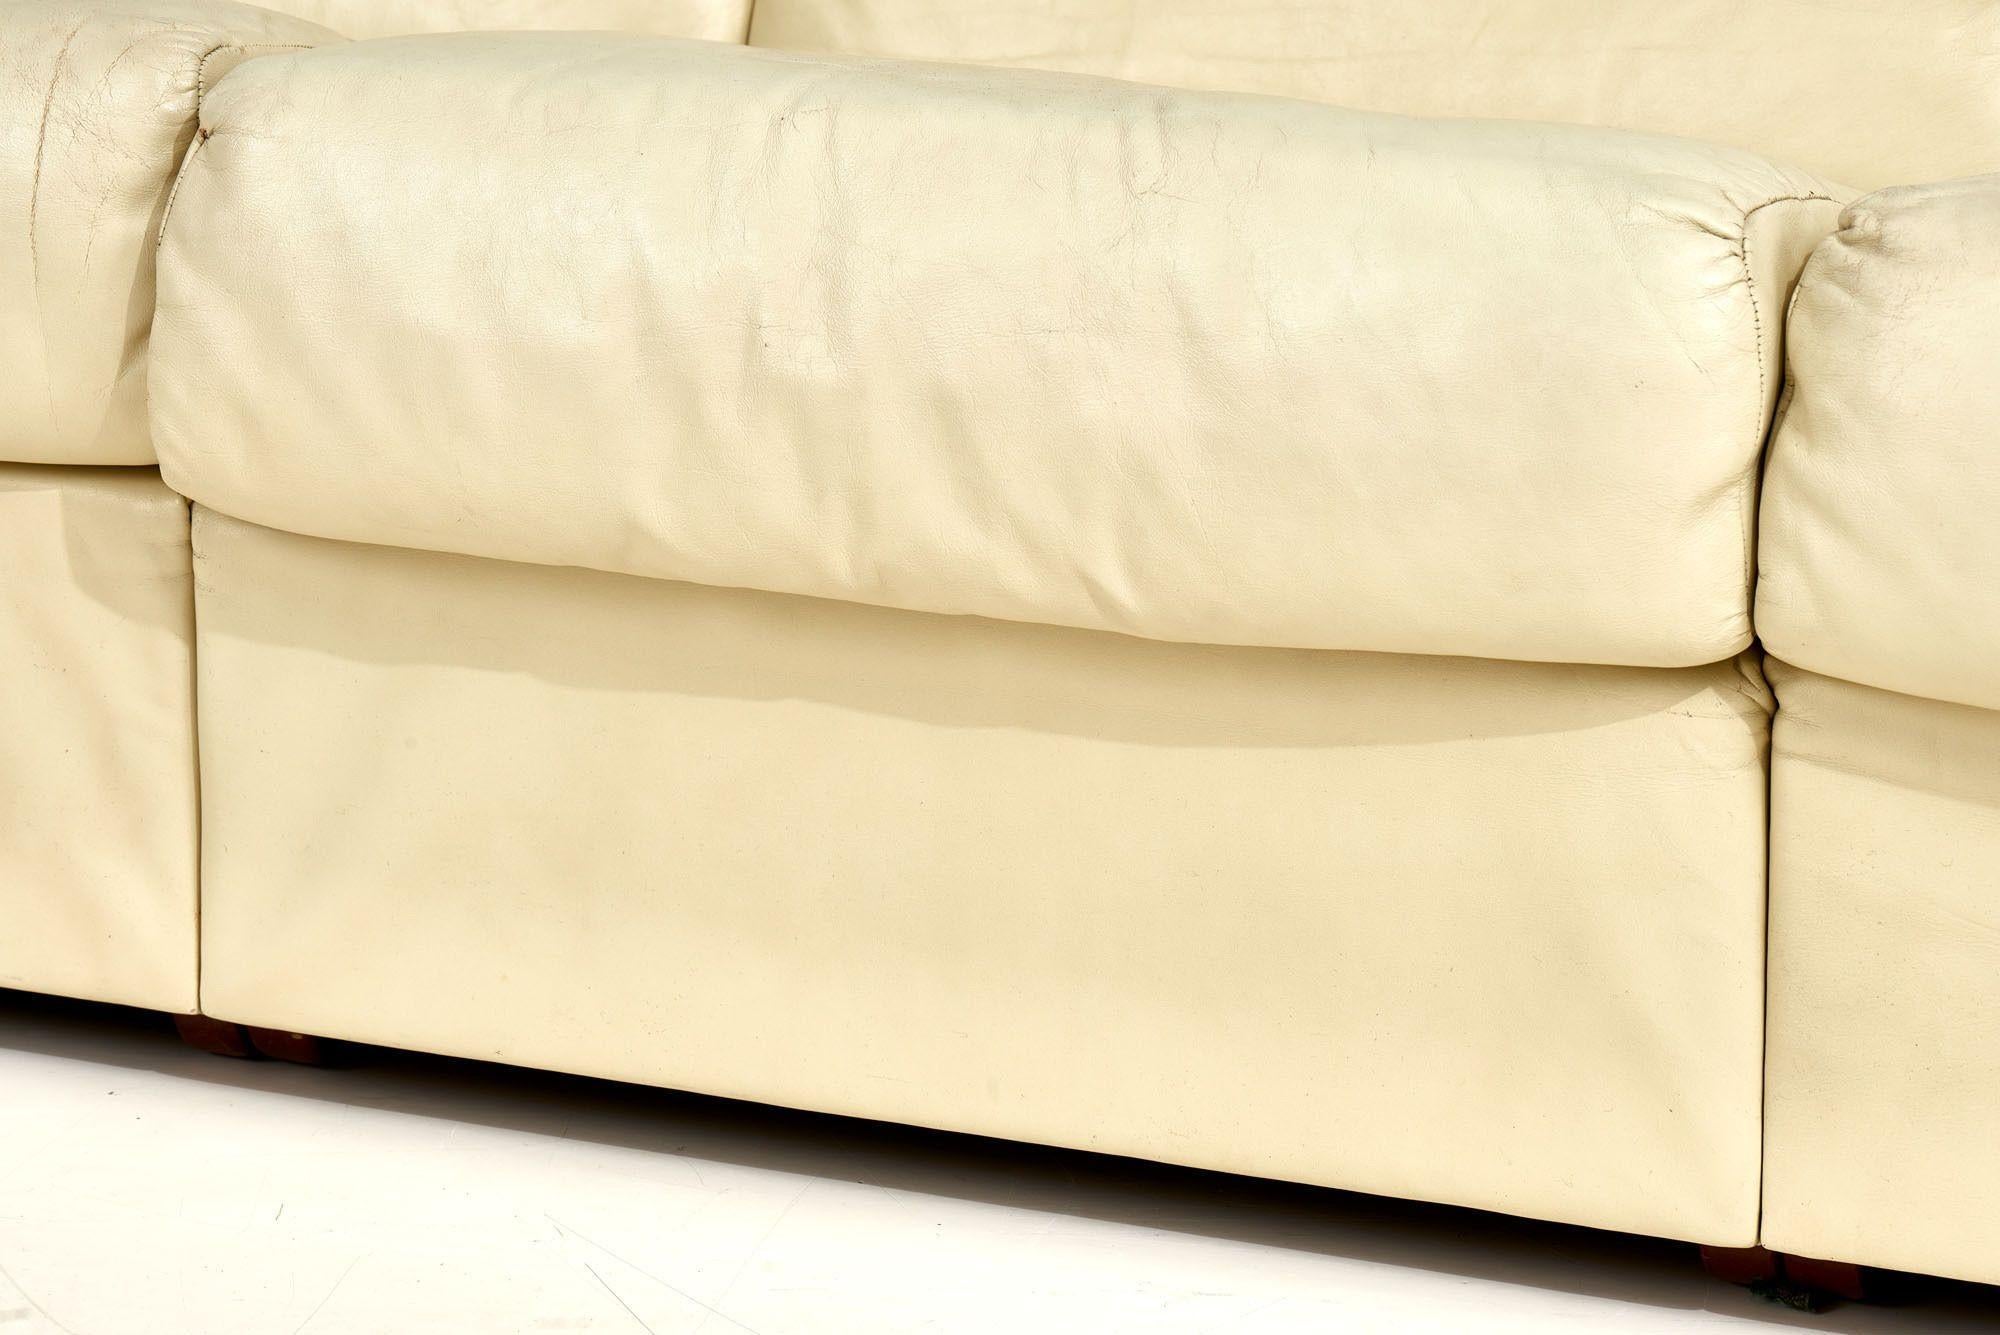 Baron Sofa by Robert Haussmann for Stendig, Cream Leather, 1970 For Sale 4